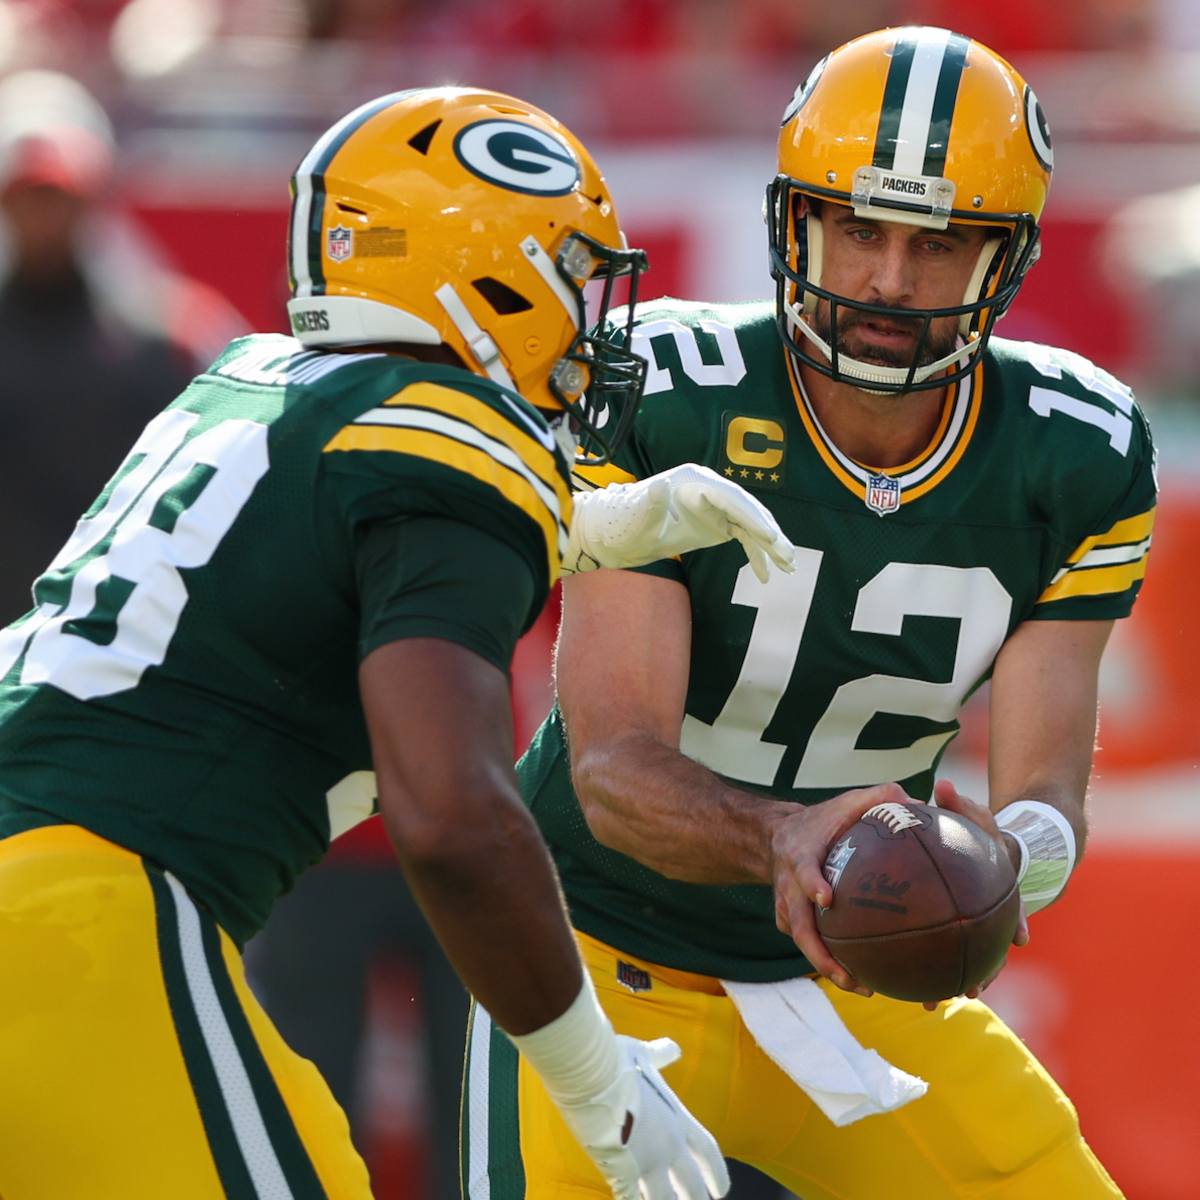 Packers are looking for play-past-the-whistle tough guys